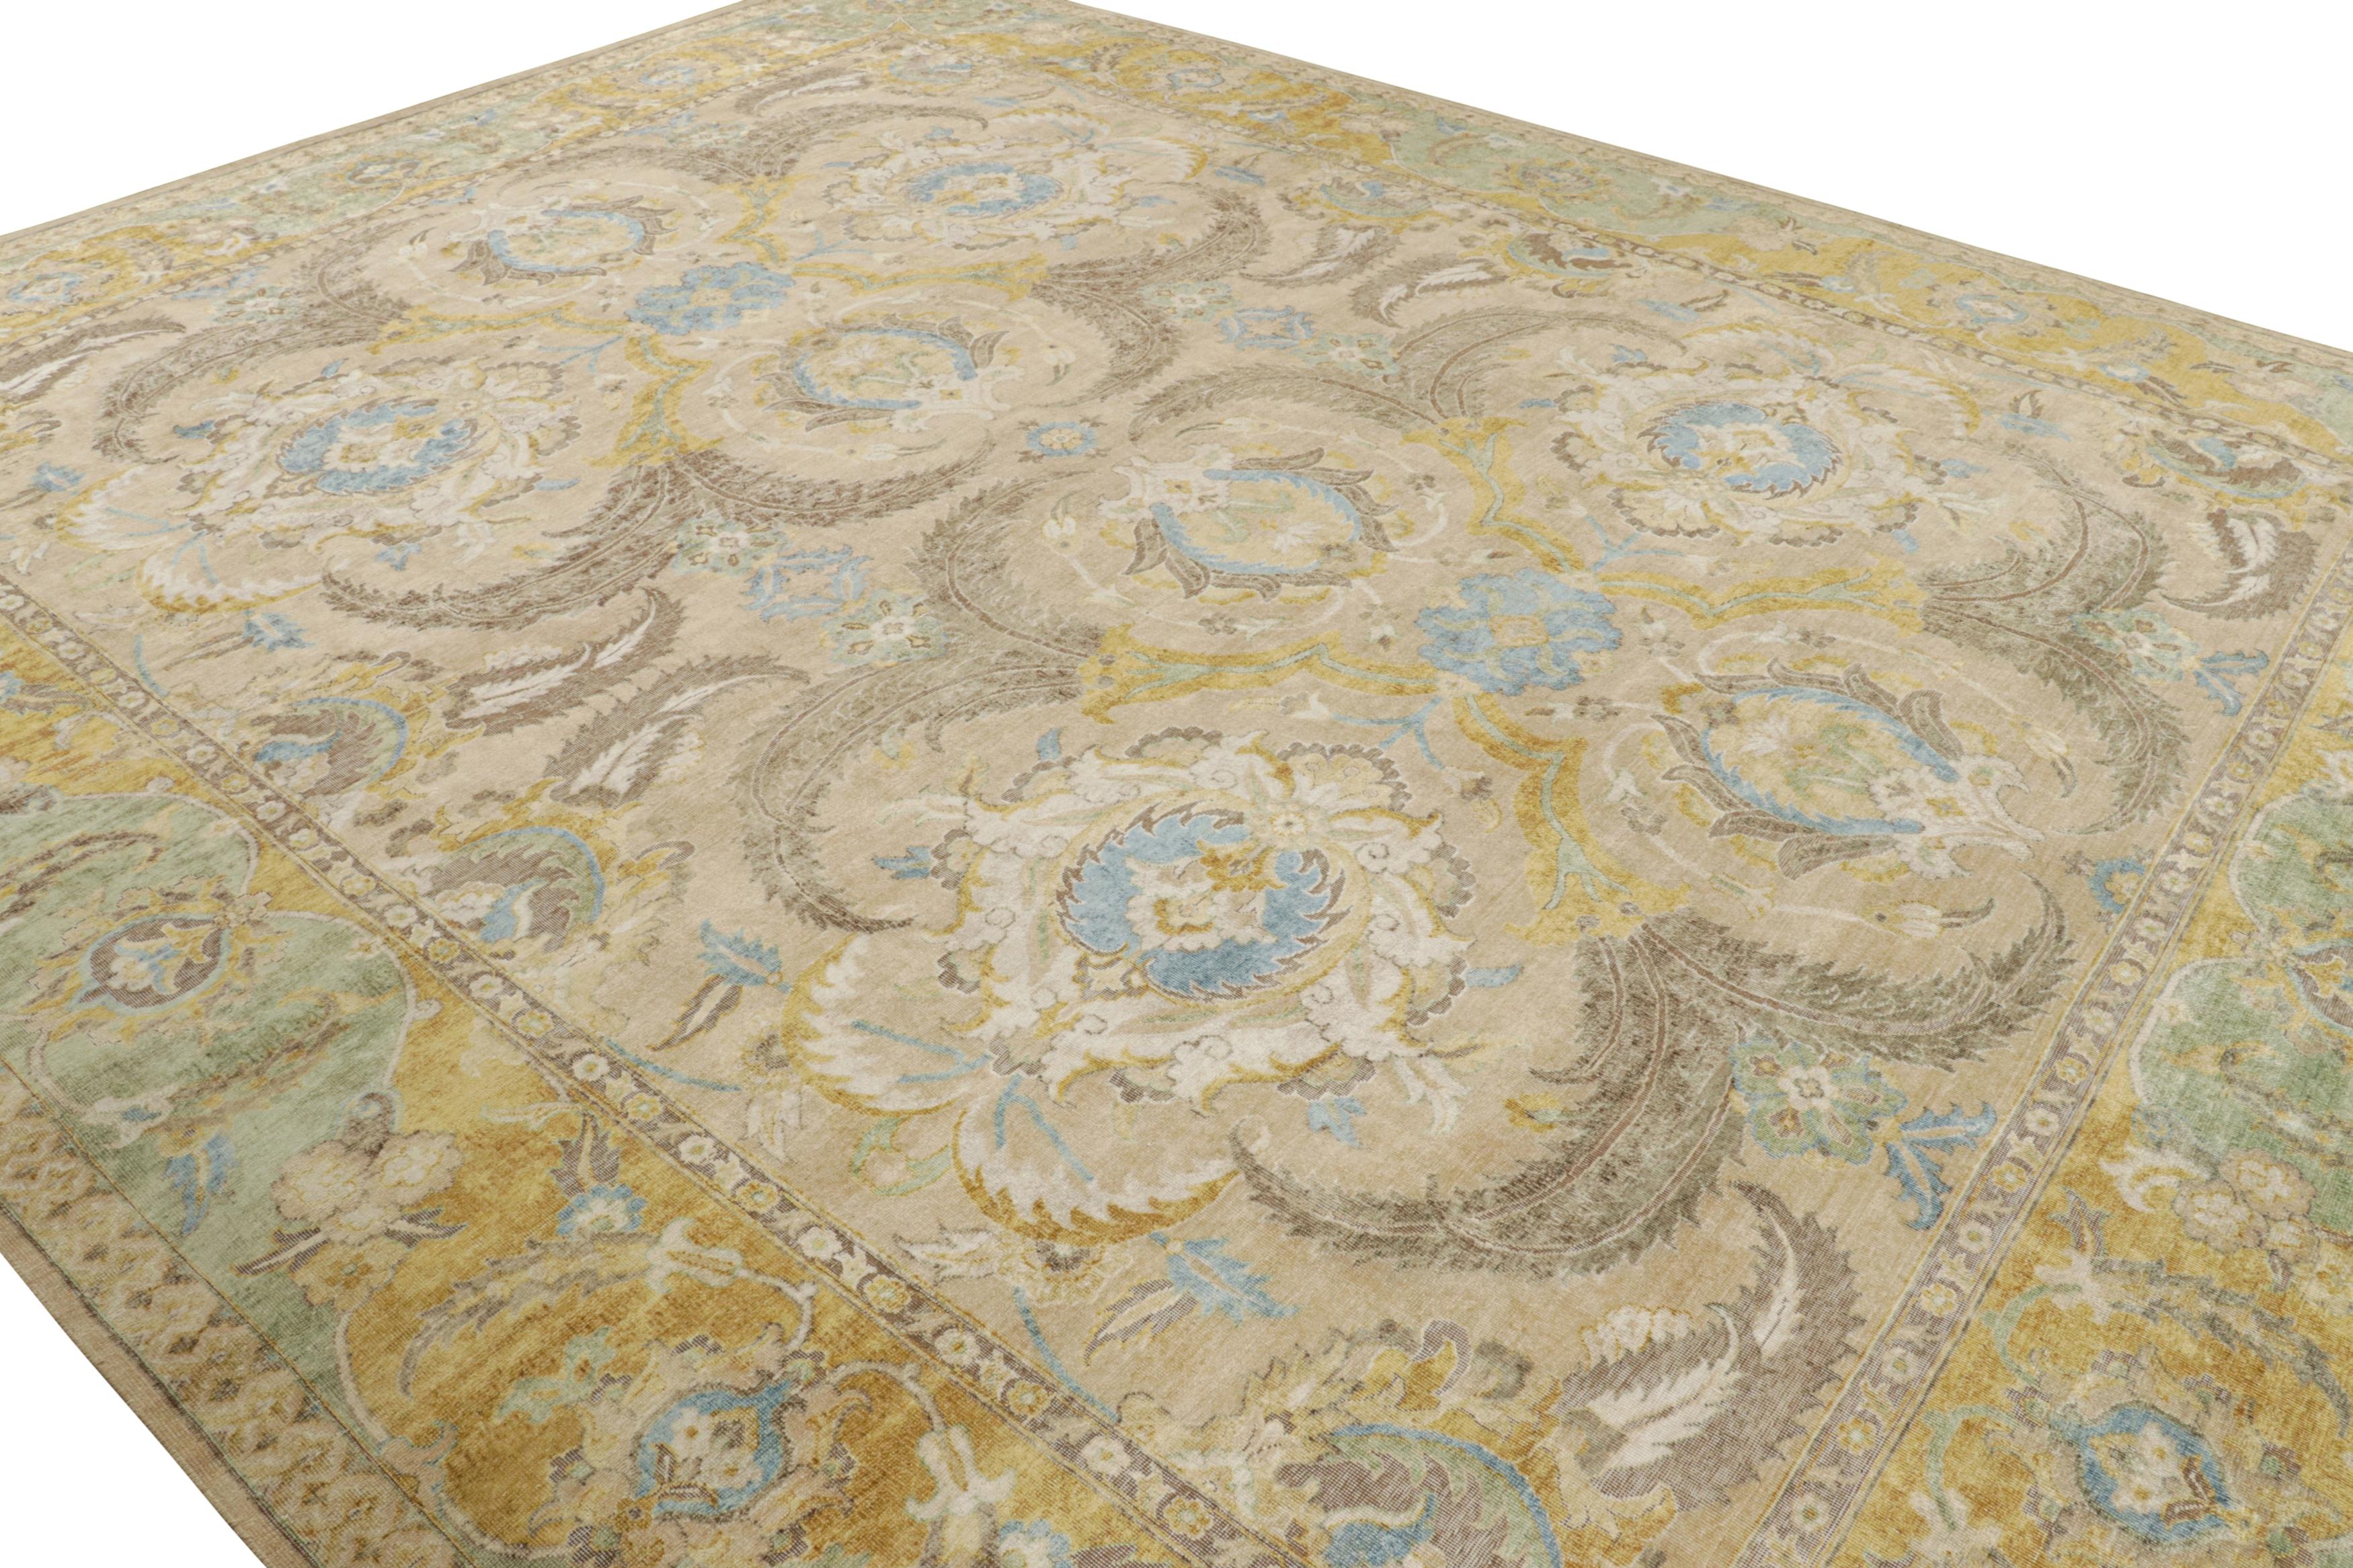 Indian Rug & Kilim’s Polonaise Style rug in Beige with Gold and Blue Floral Patterns For Sale